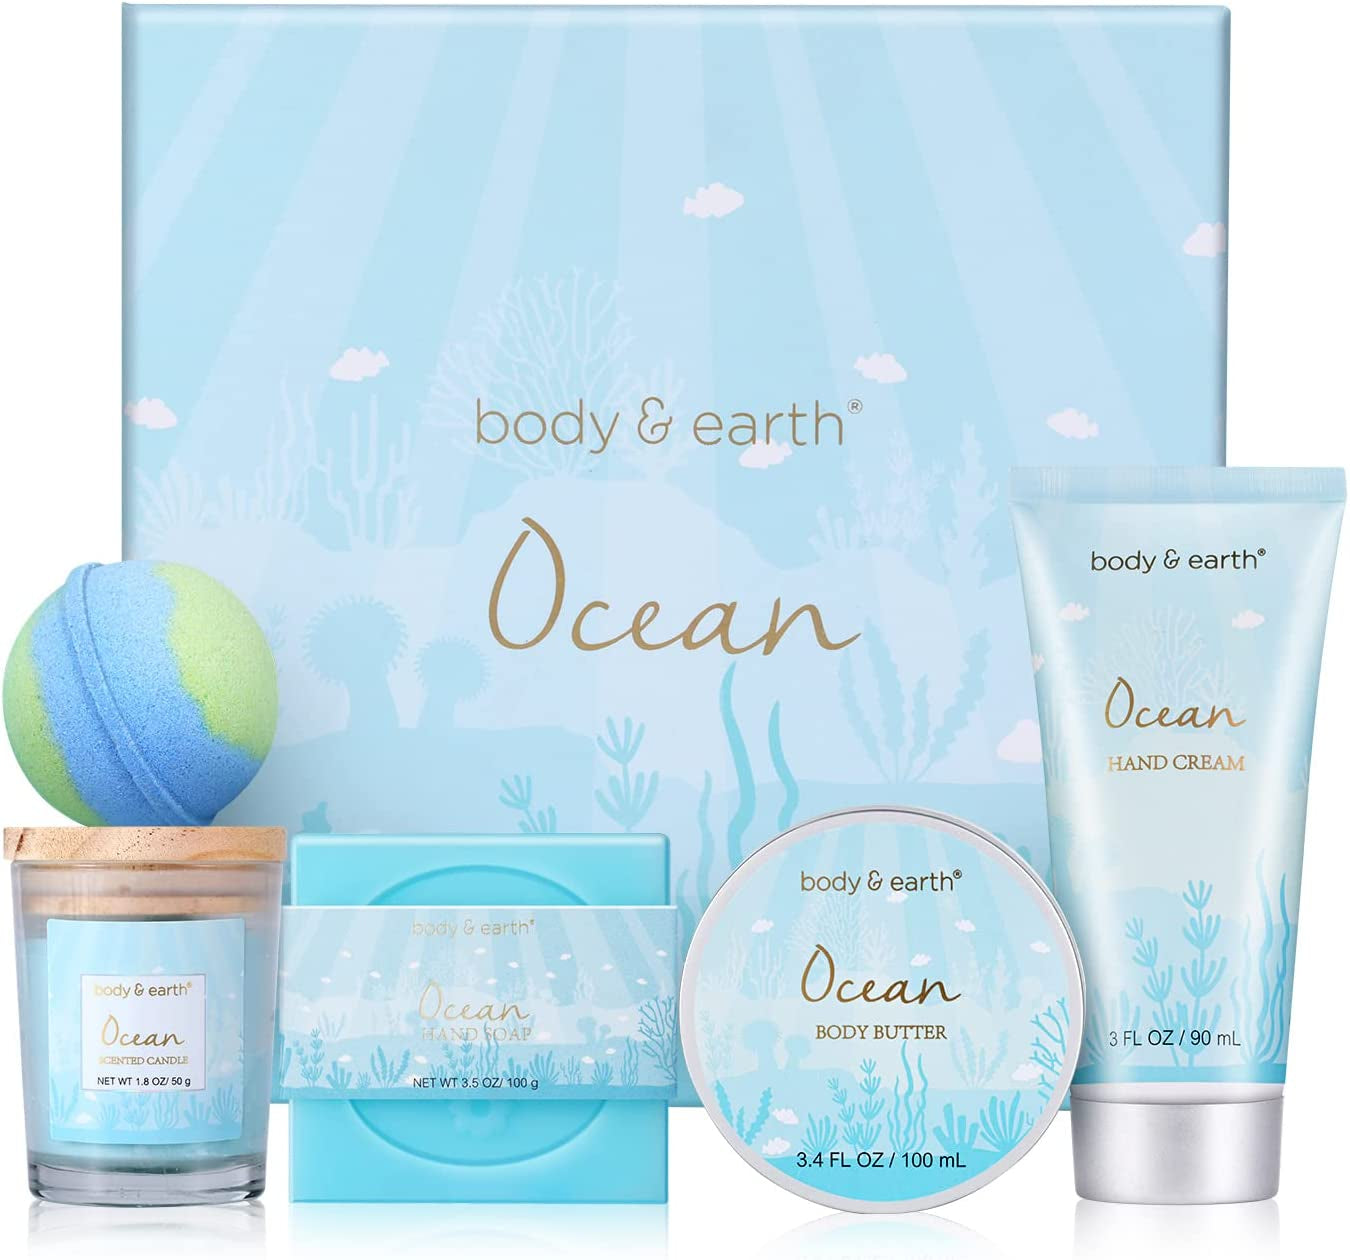 Pamper Gifts for Women, 5 Pcs Ocean Bath Spa Gift Set Includes Scented Candle, Body Butter, Gifts for Women, Birthday Gifts for Women, Gift Sets for Women, Relaxation Gifts for Women